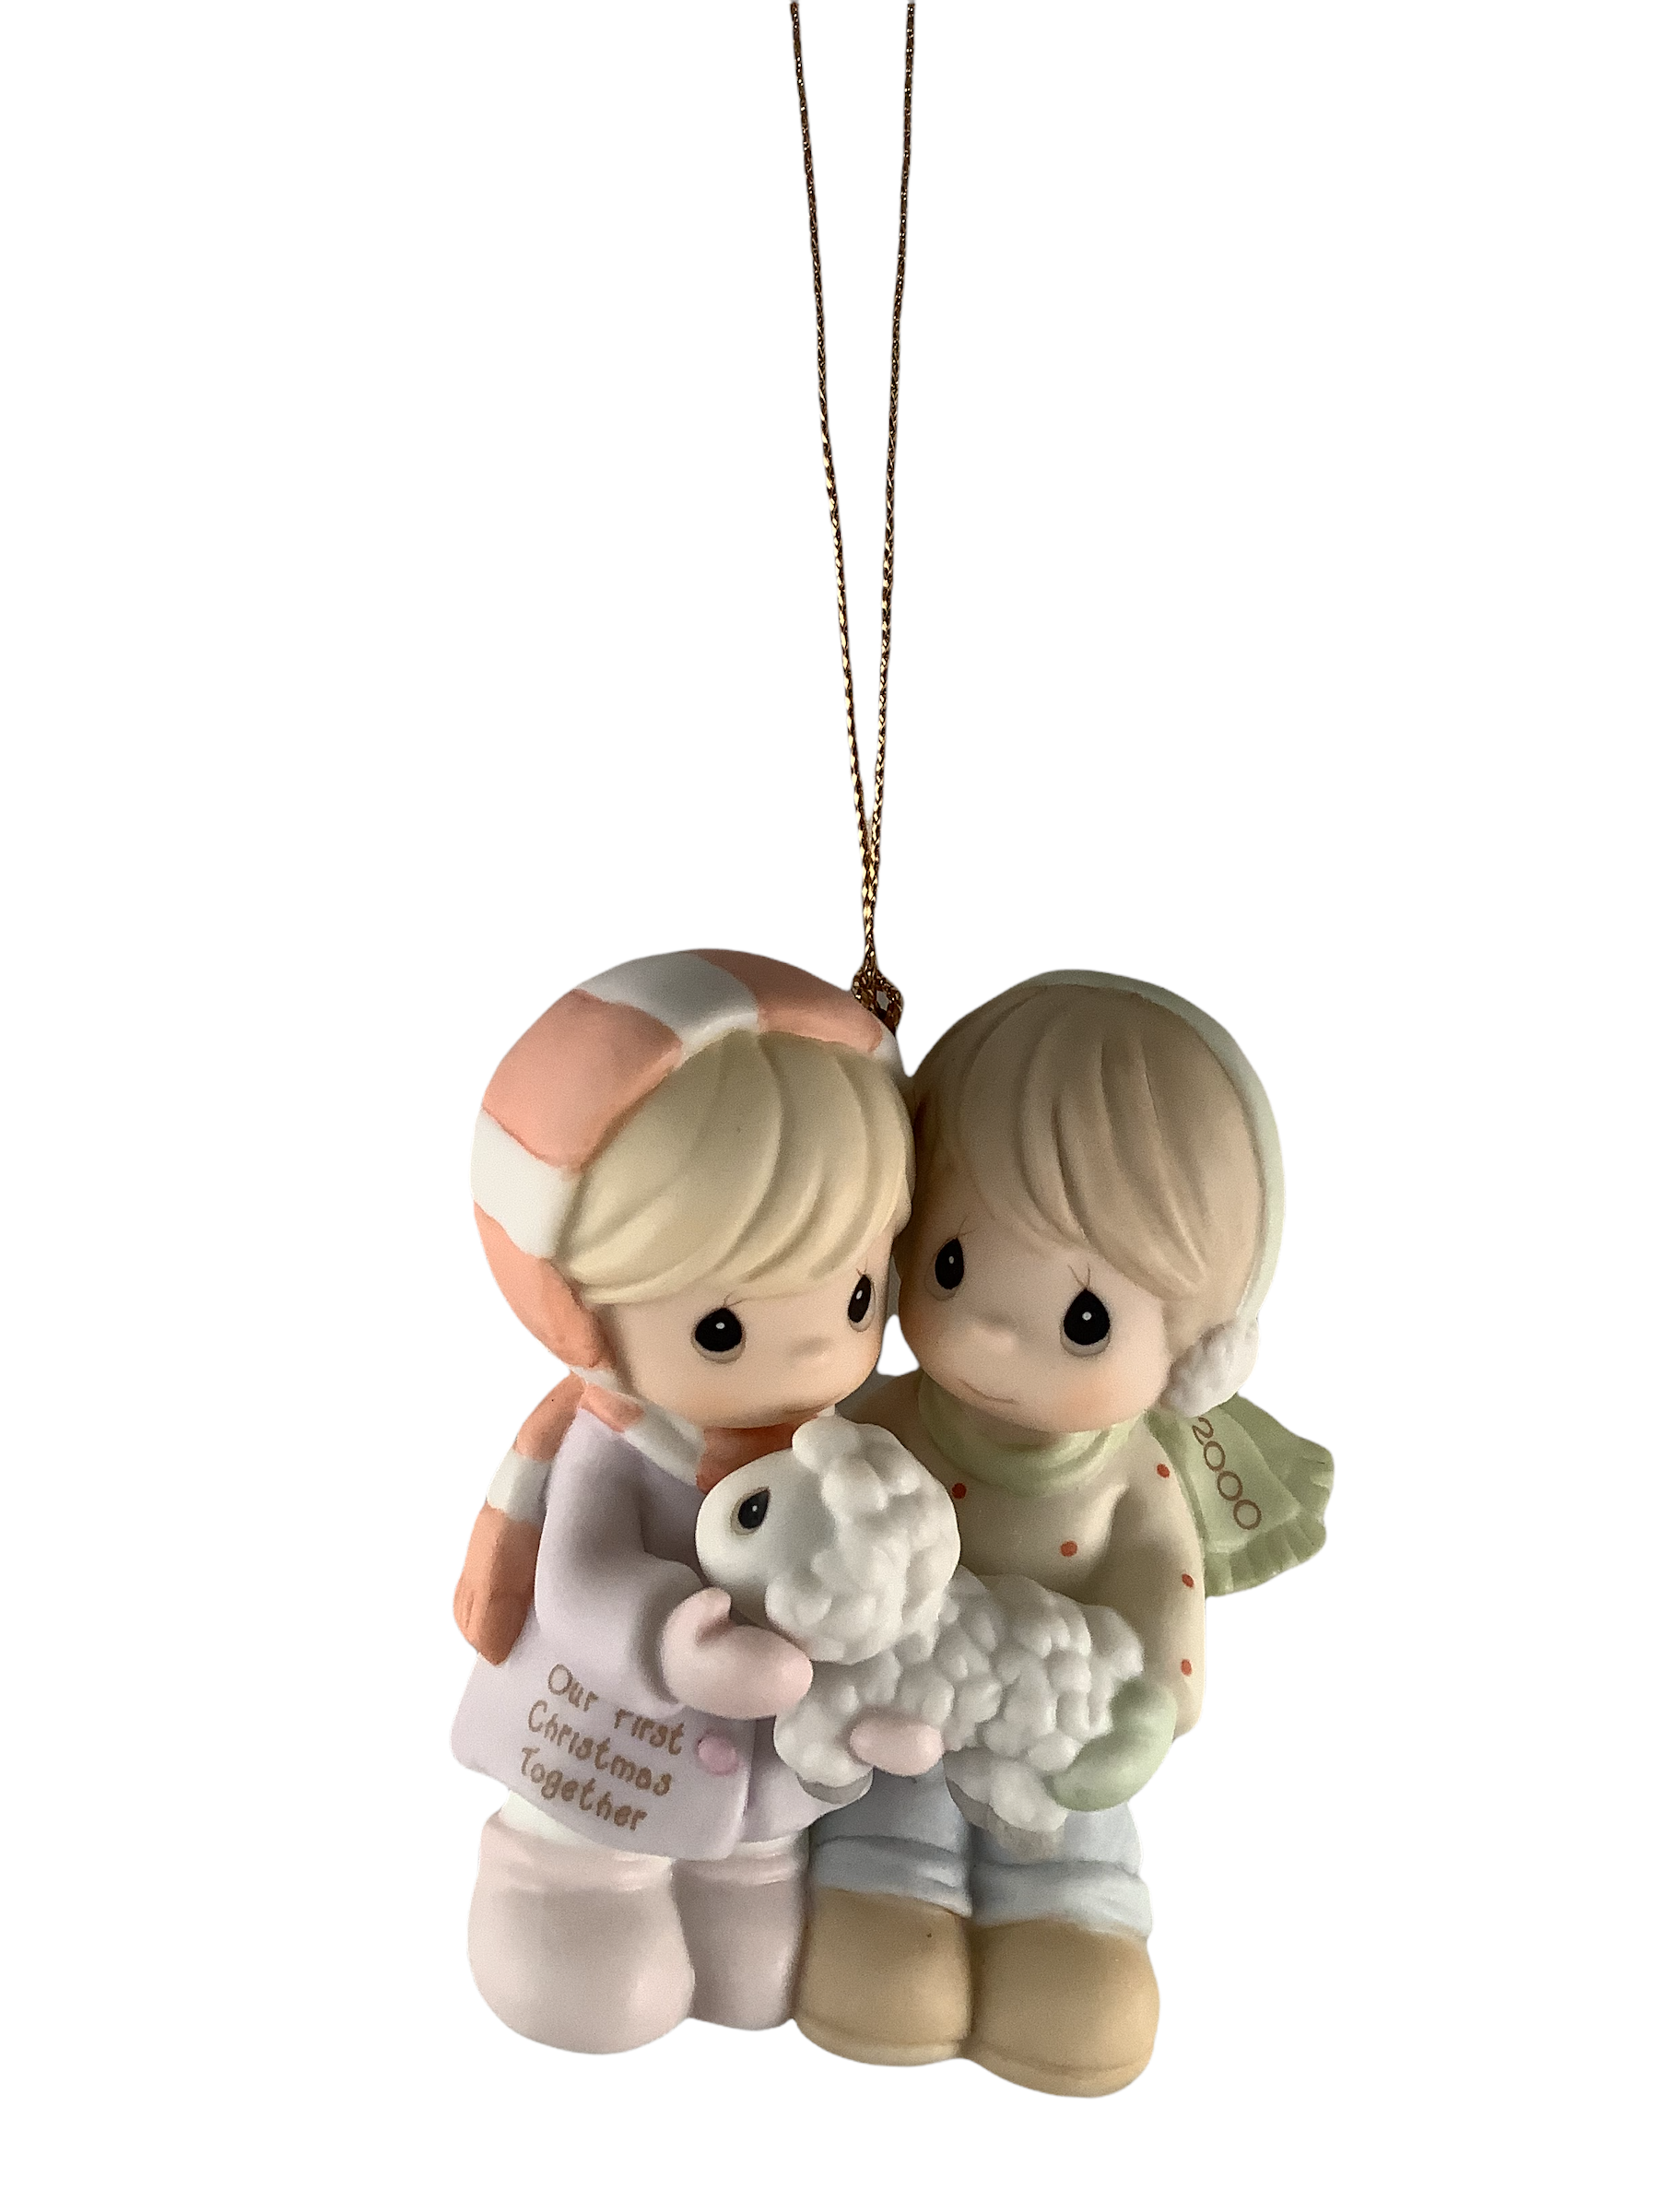 Our First Christmas Together 2000 - Precious Moment Ornament